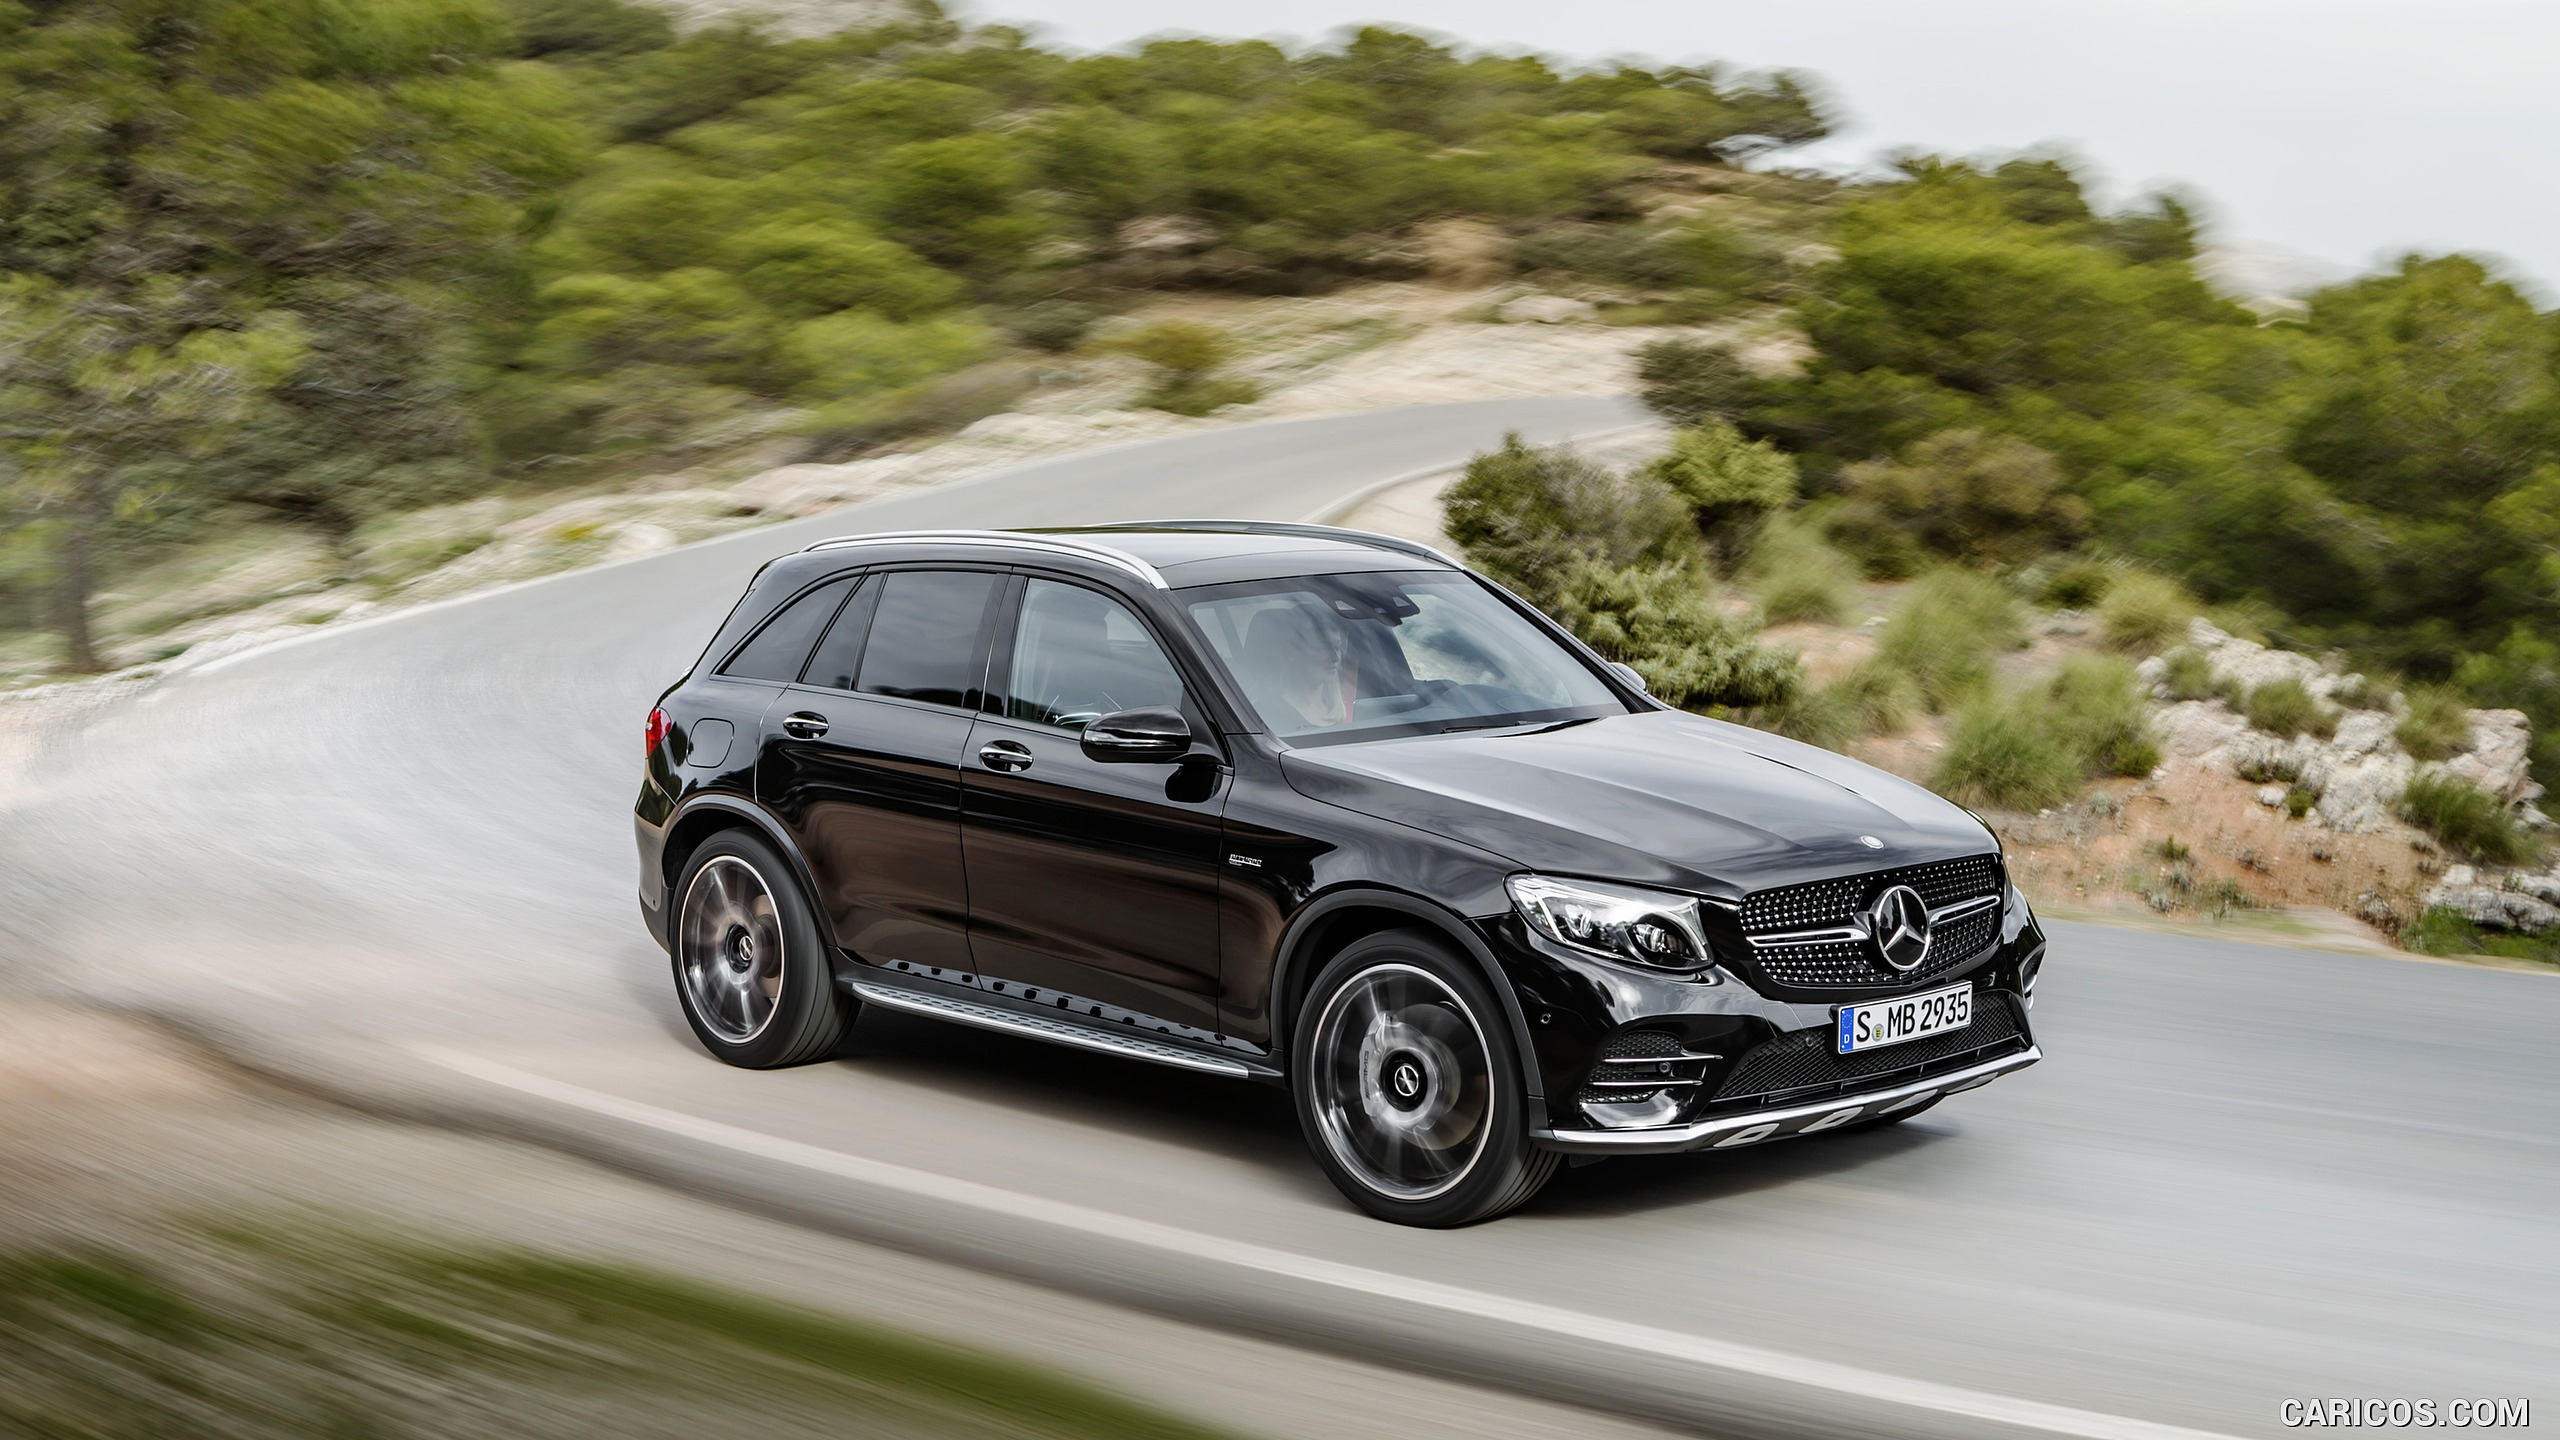 2017 Mercedes-AMG GLC 43 4MATIC (Chassis: X253, Color: Obsidian Black) - Front, #13 of 108